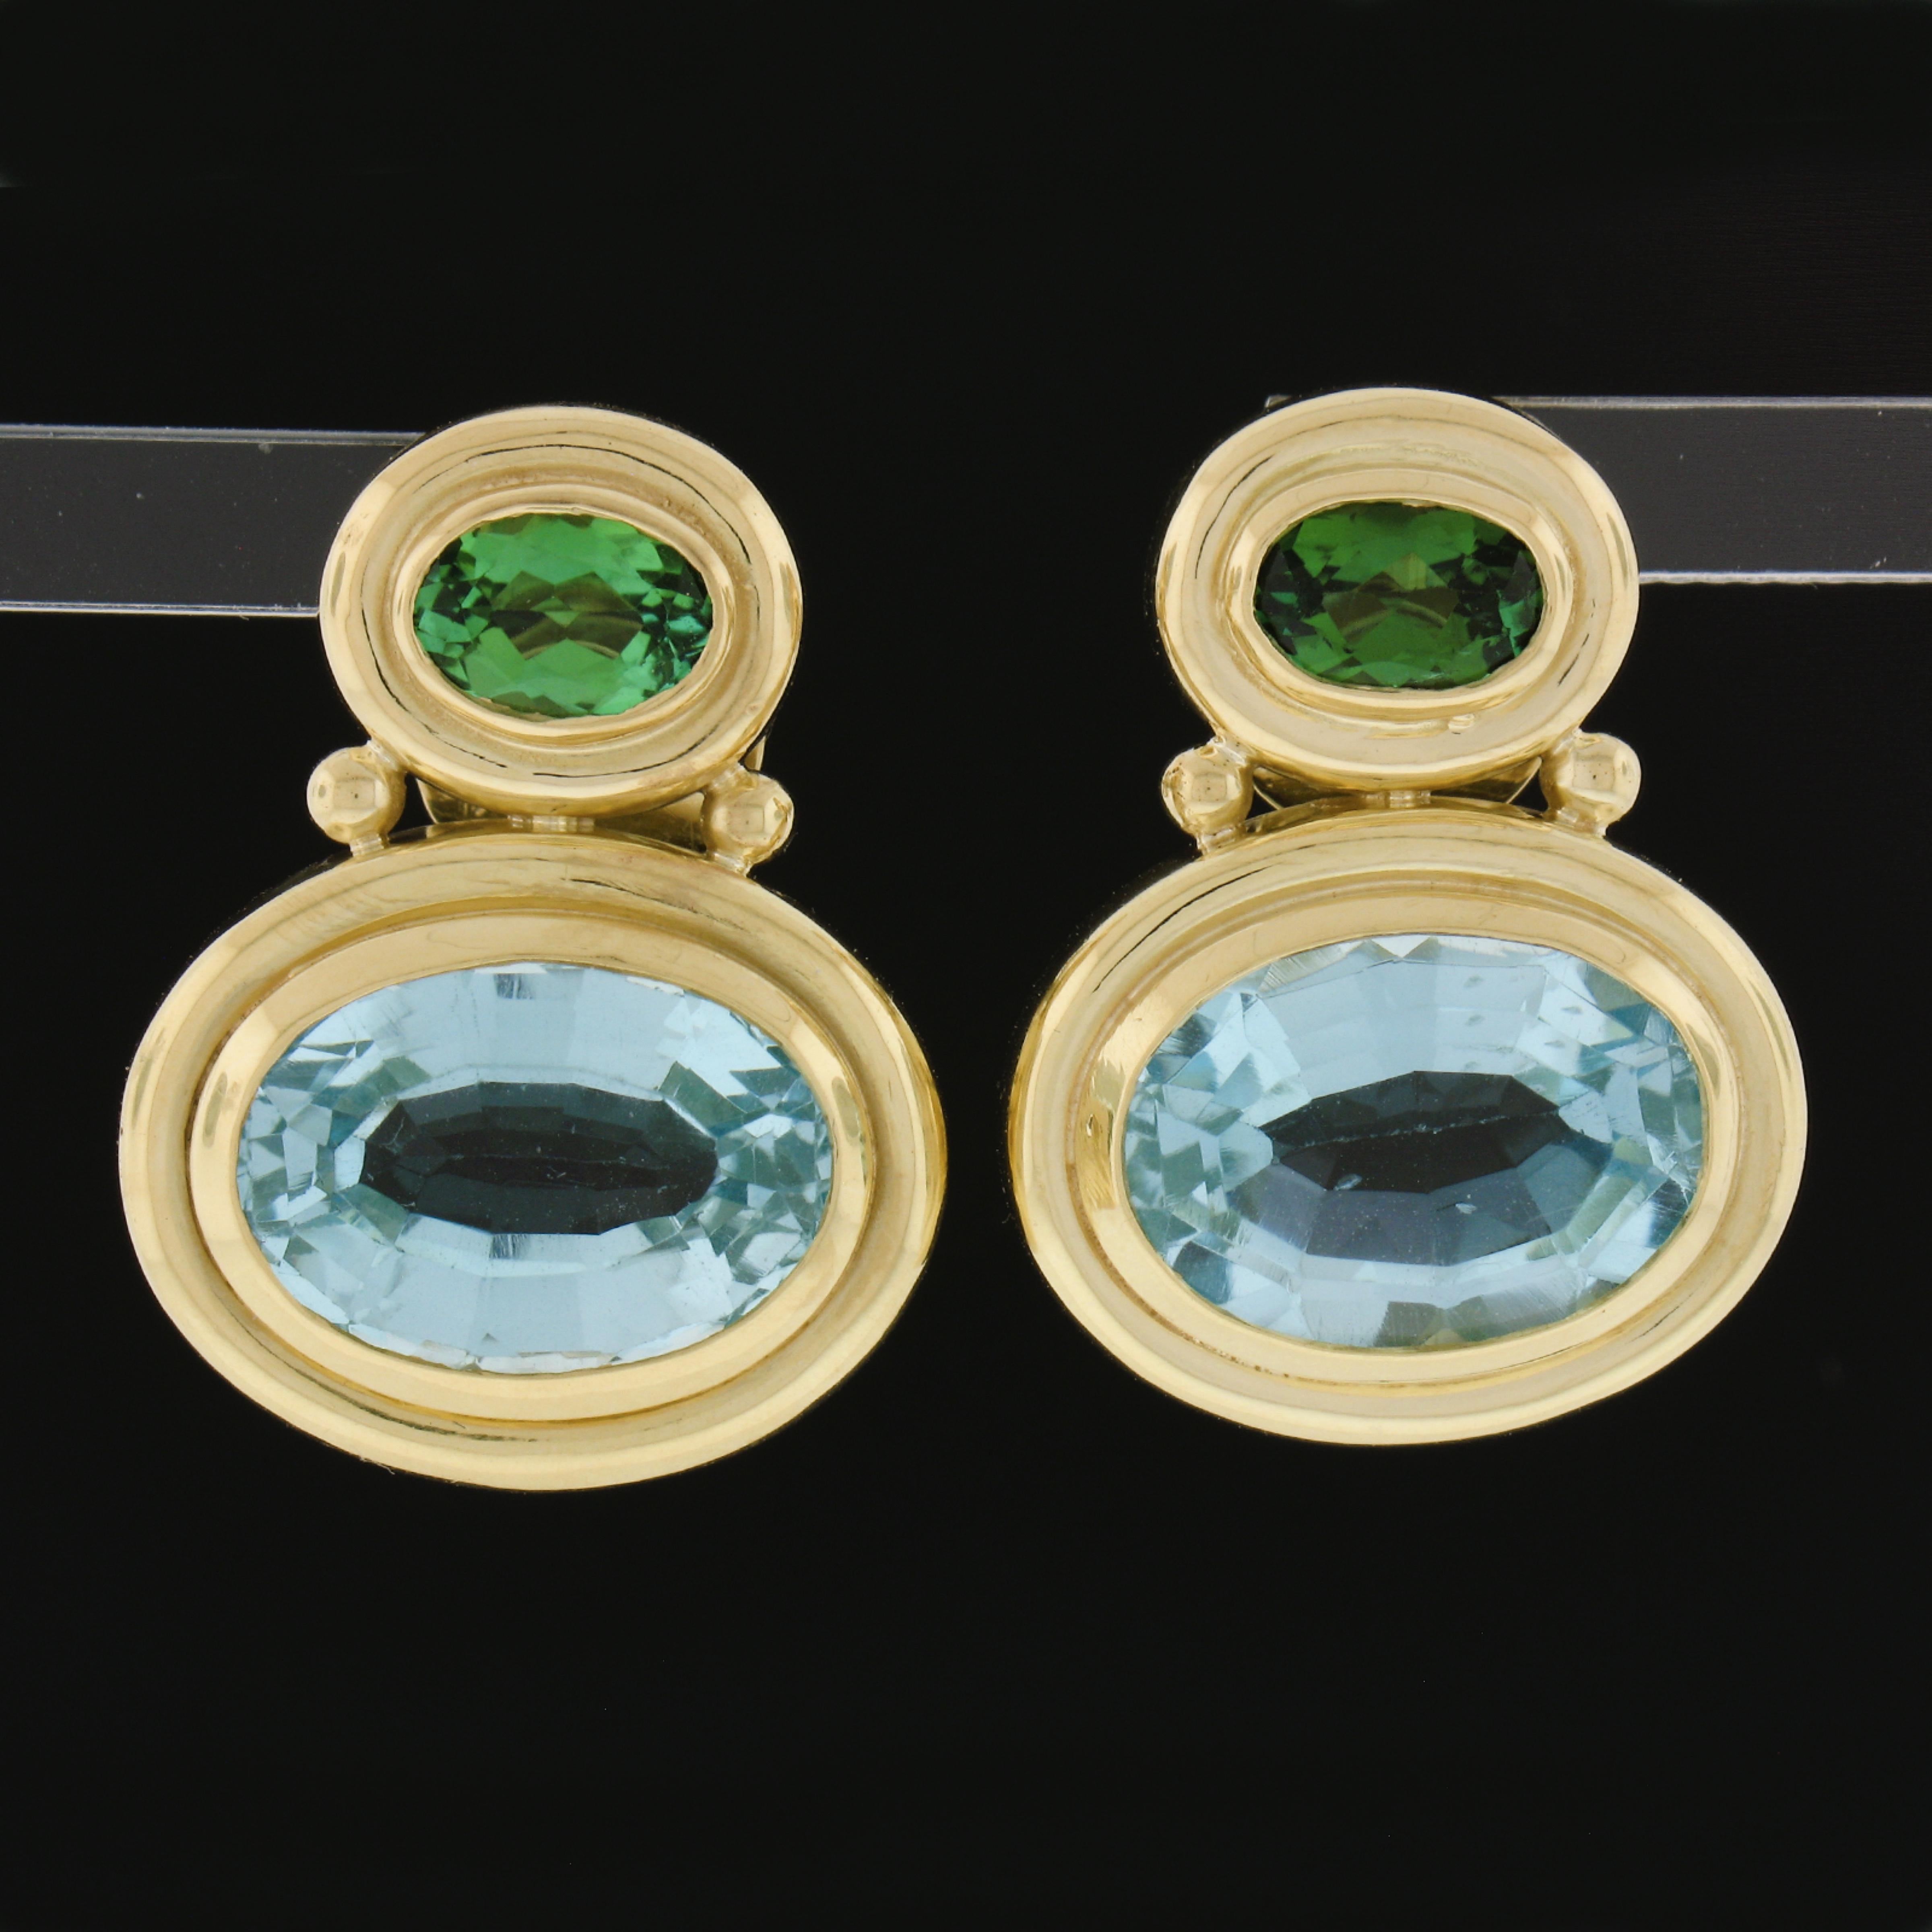 These beautiful elegant drop earrings are crafted from solid 18k yellow gold. They feature oval Blue topaz and oval green tourmaline stones. The stones are neatly bezel set in a simple polished frames. The earrings secure with posts and safe